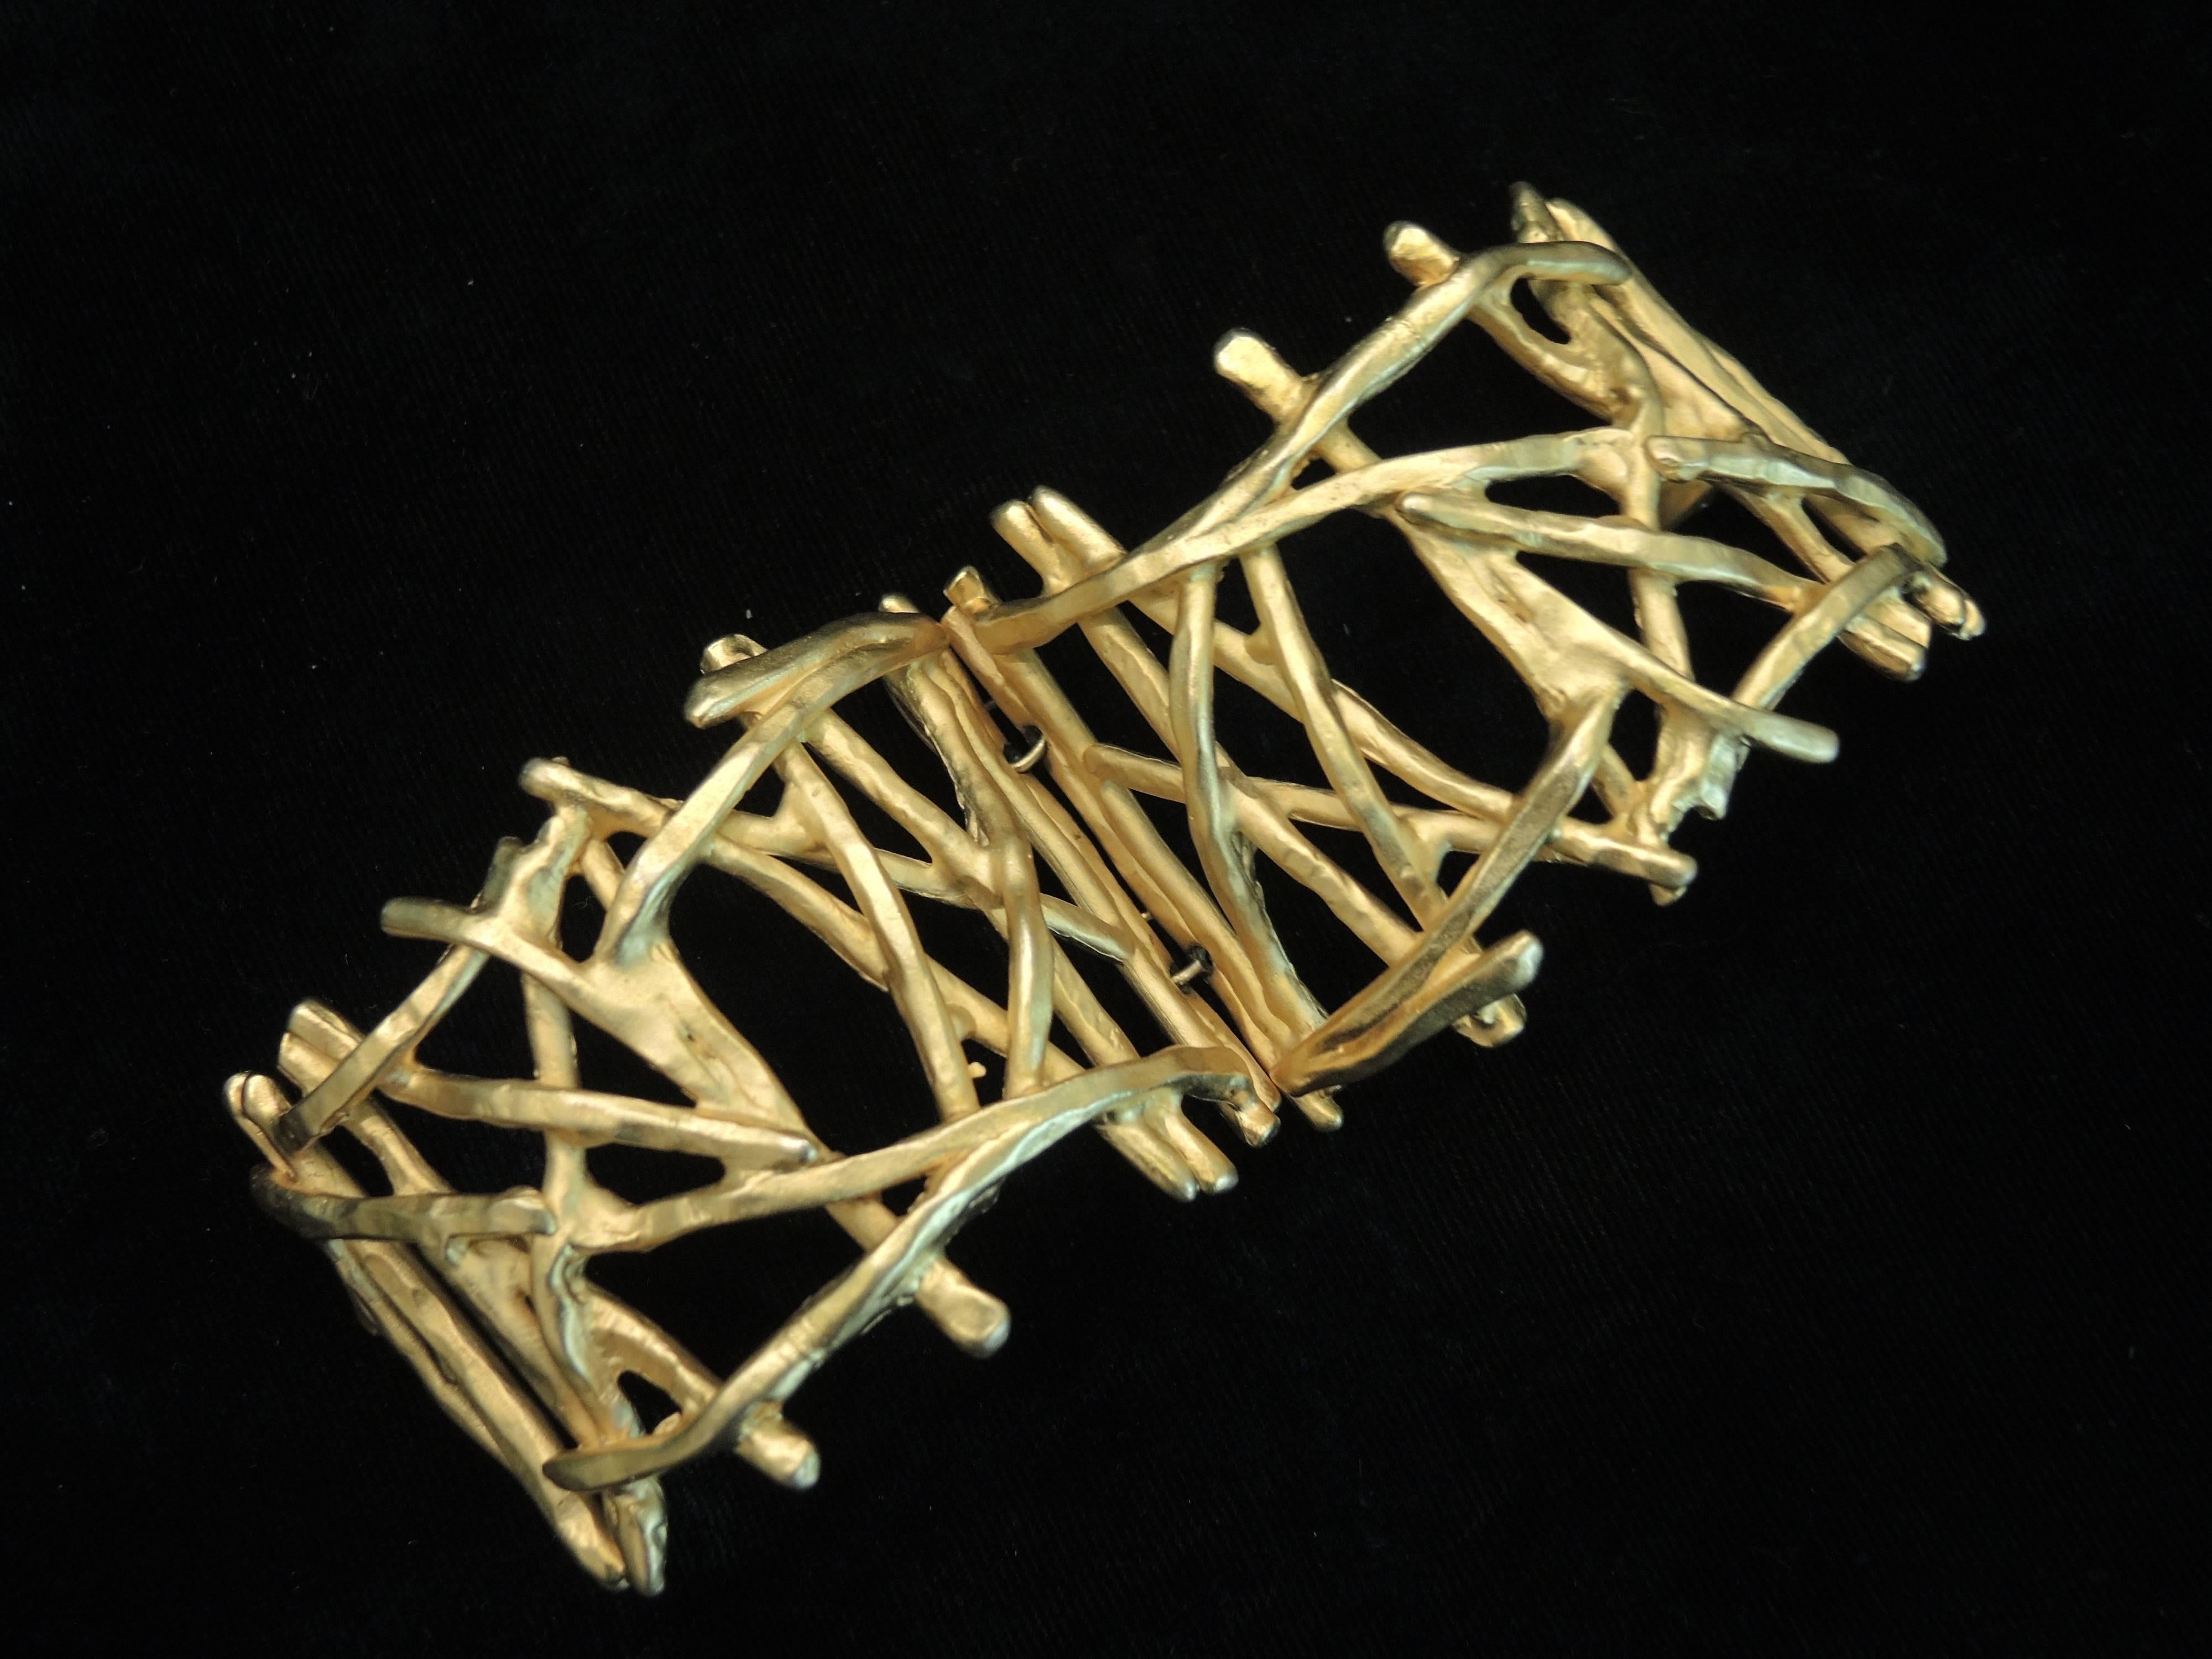 This vintage signed Christian LaCroix bracelet features the famous abstract ‘branches’ design in a gold-tone setting. In excellent condition, this bracelet measures 7” x 2 ¼” and is signed “Christian LaCroix Paris”.